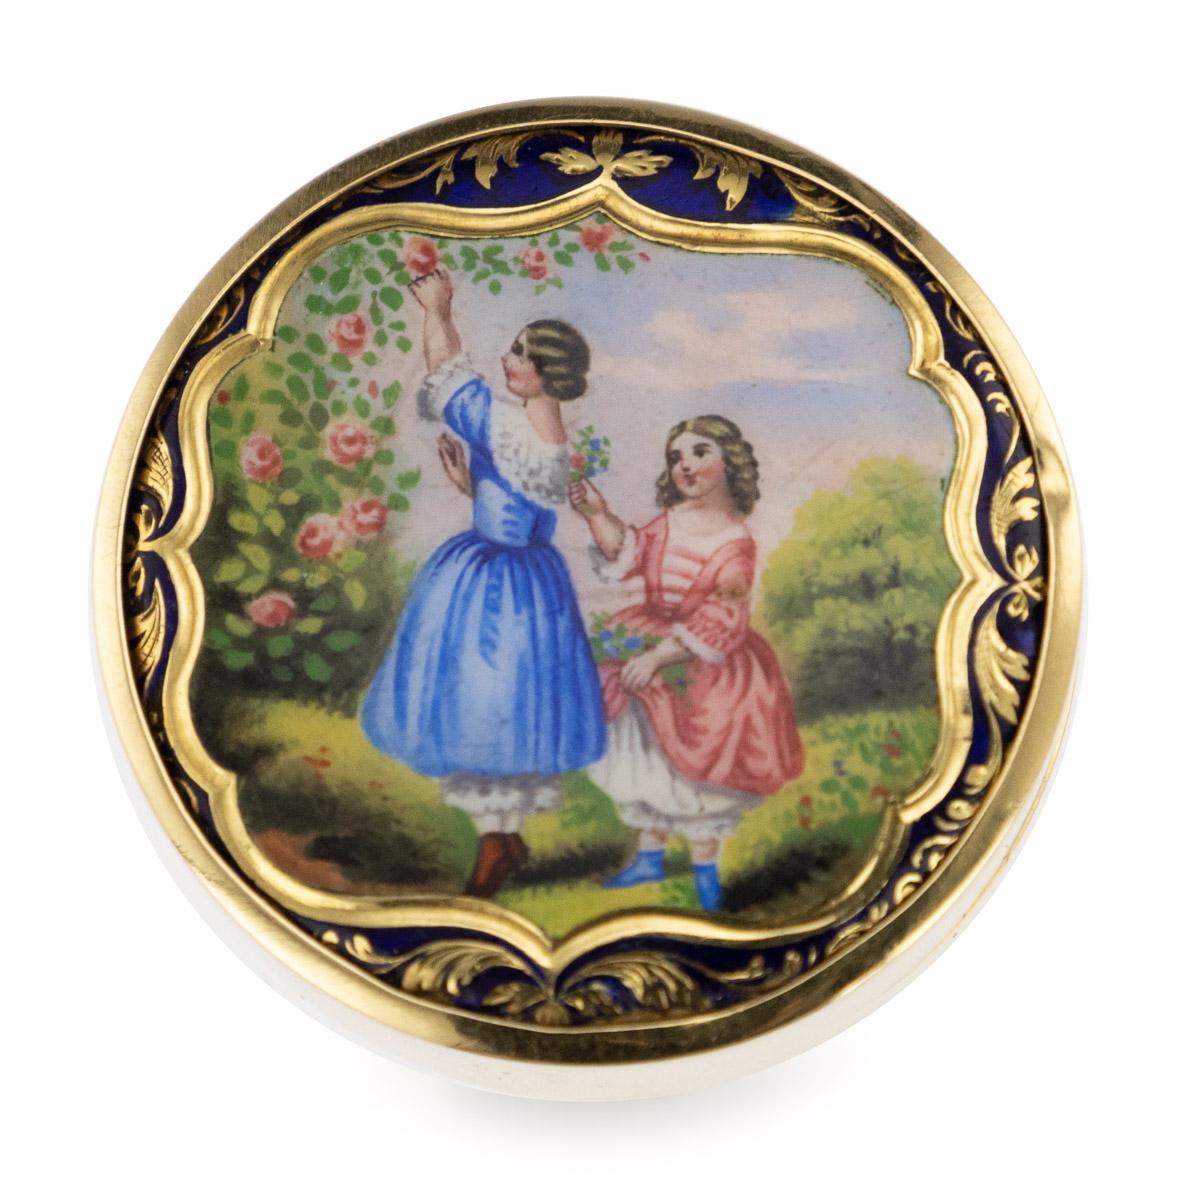 Antique early 20th century Imperial Russian 14-karat solid gold & hand painted enamel pill box, the lid hand painted depicting two sisters picking roses in the garden, within a cartouche shaped reserve, surrounded by blue enamel. Hallmarked Russian